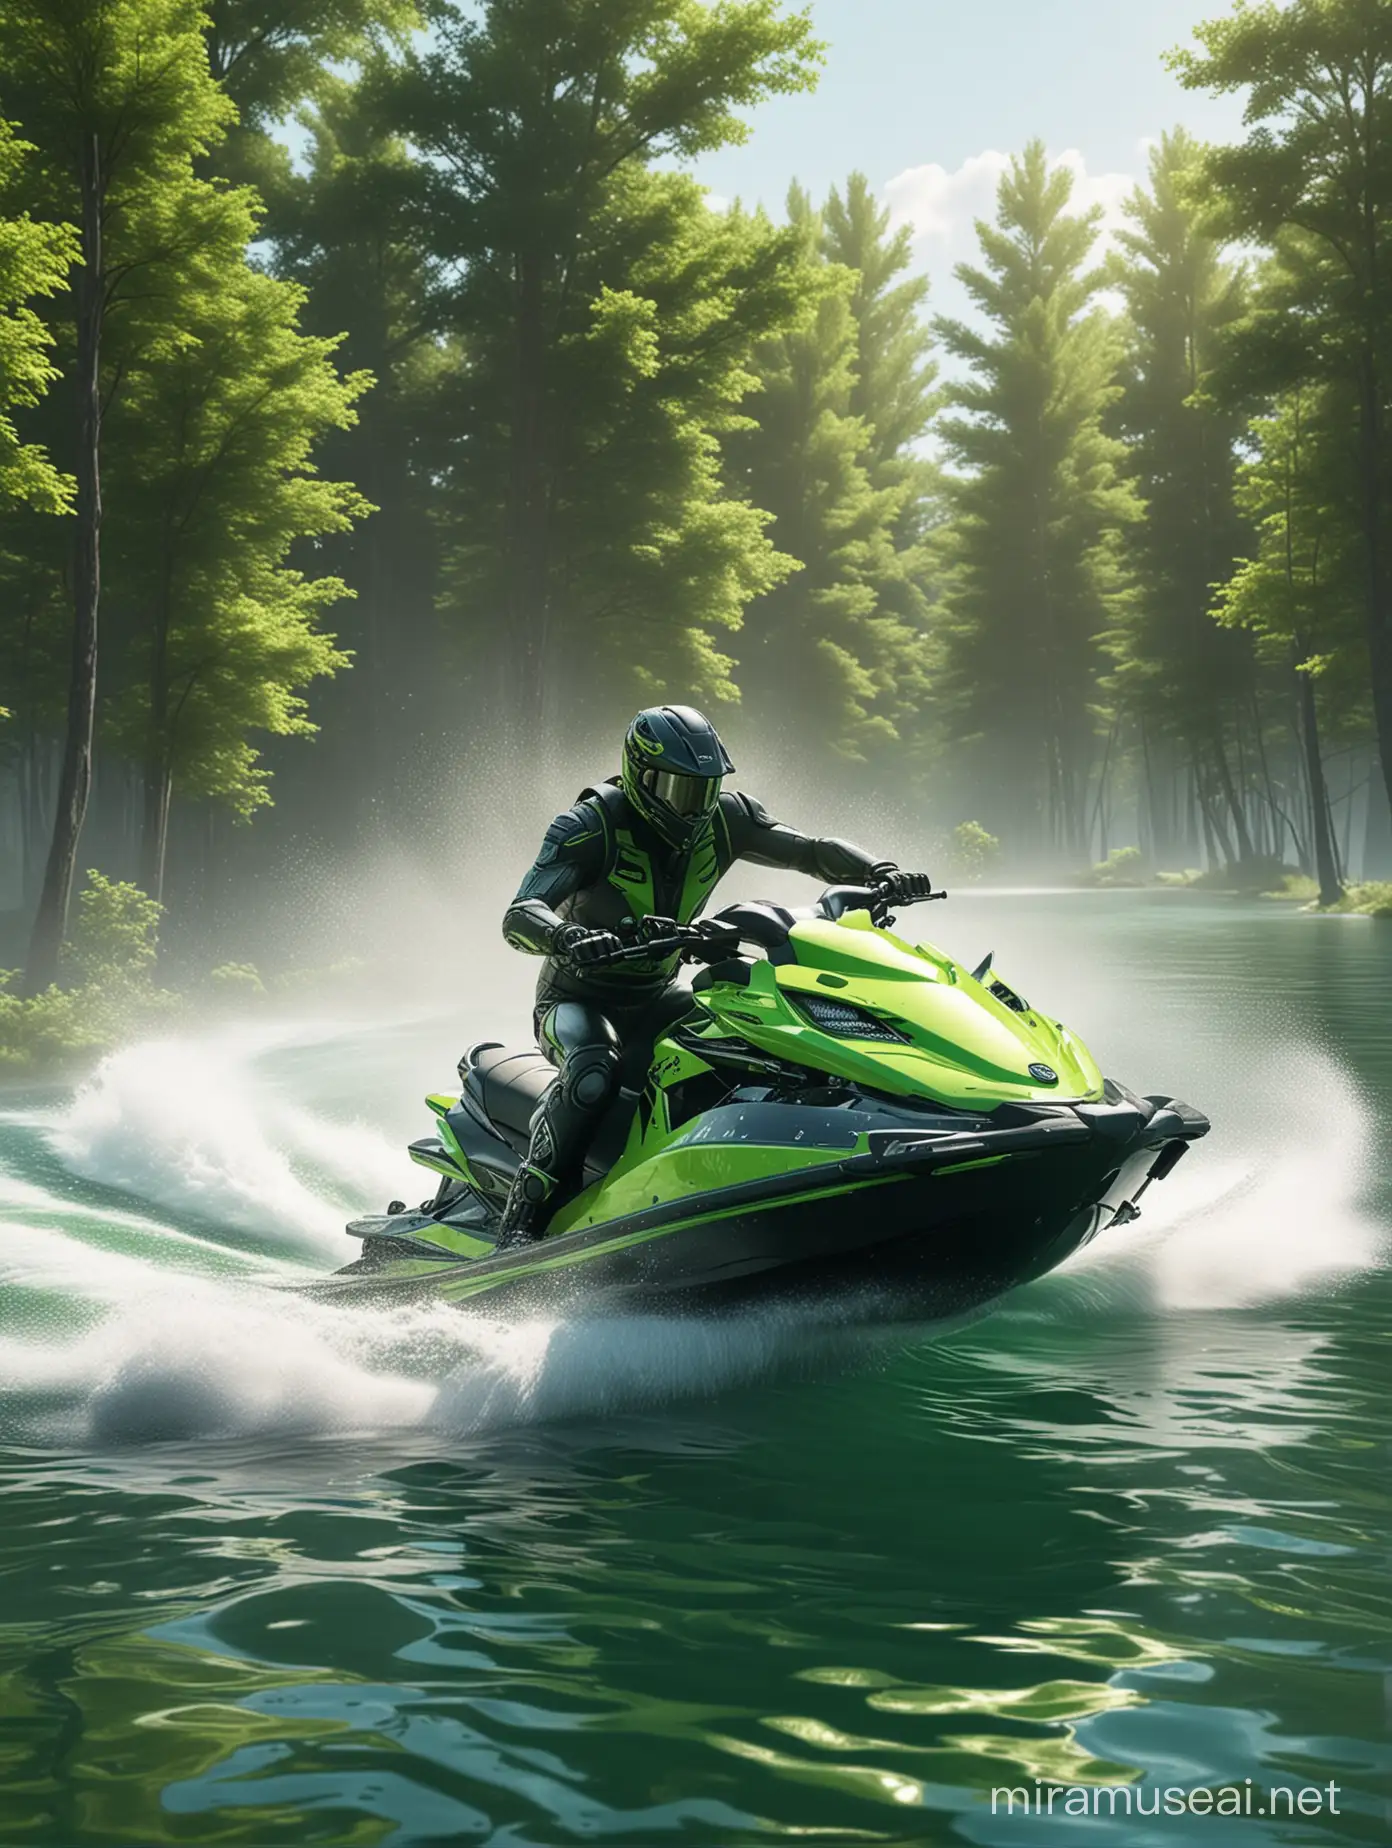 ultra realistic neon green jetski, riding on water, with trees on the sides, bright sunny day and cinematic lighting 